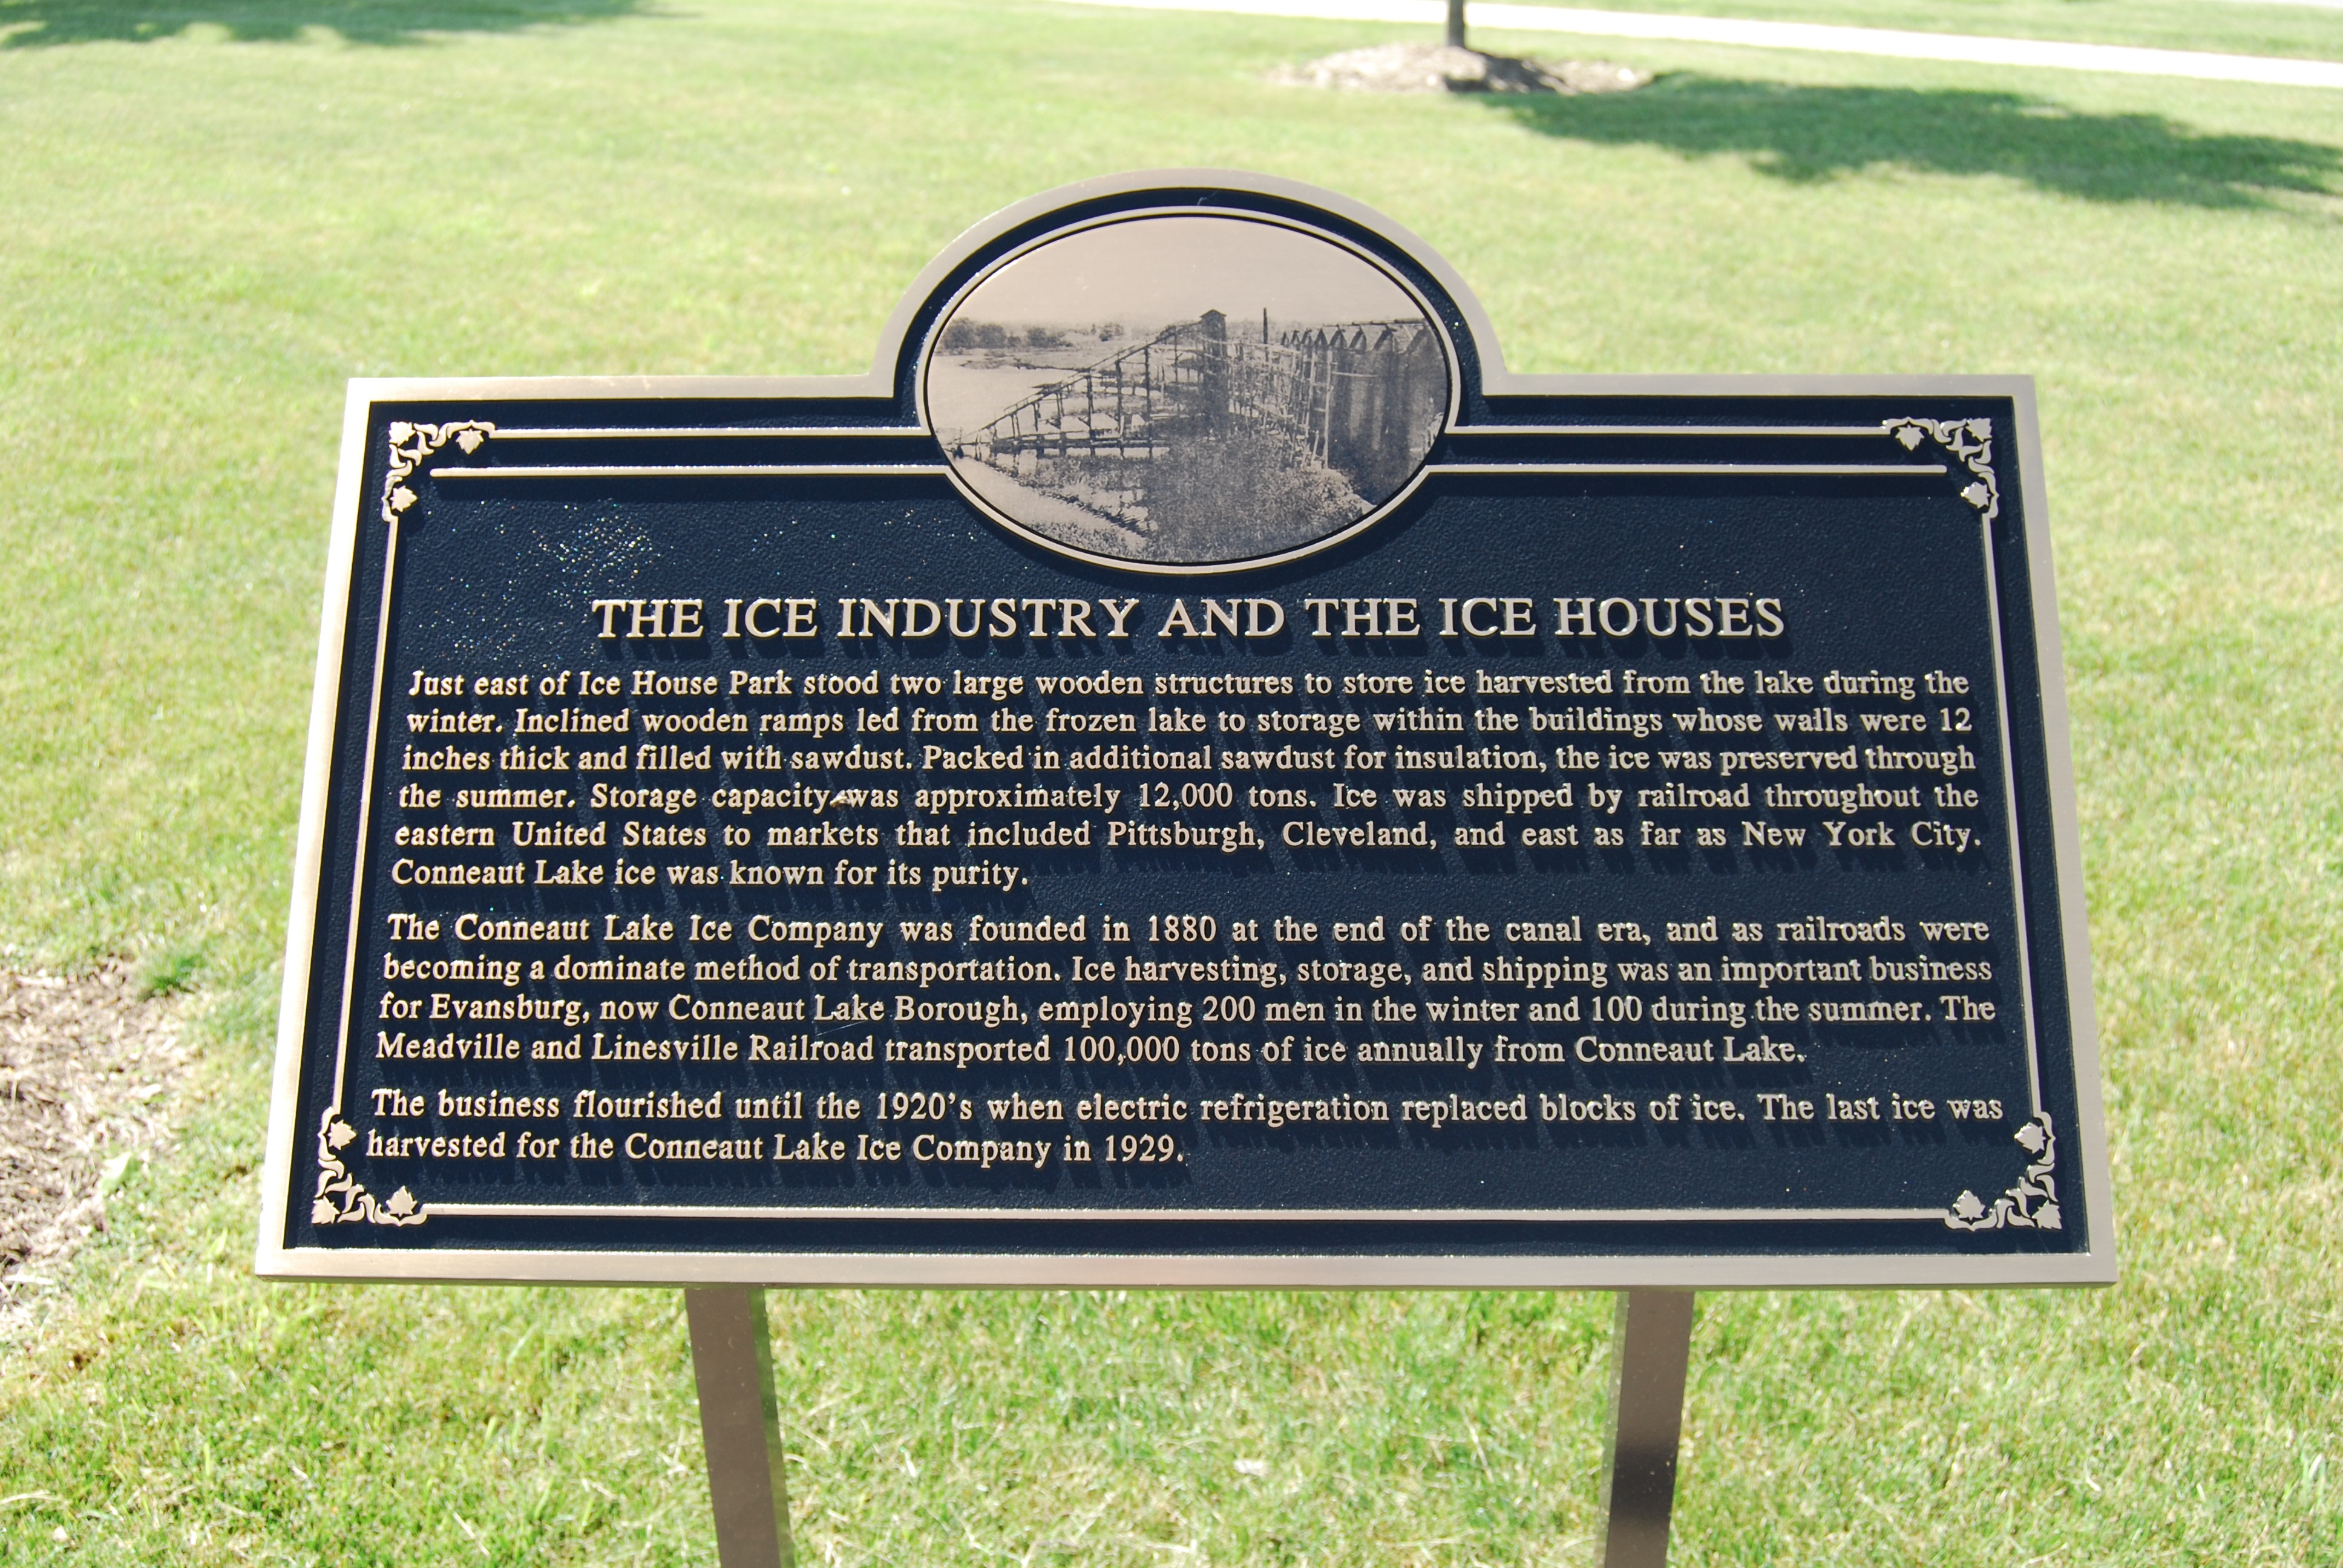 The Ice Industry and the Ice Houses Marker